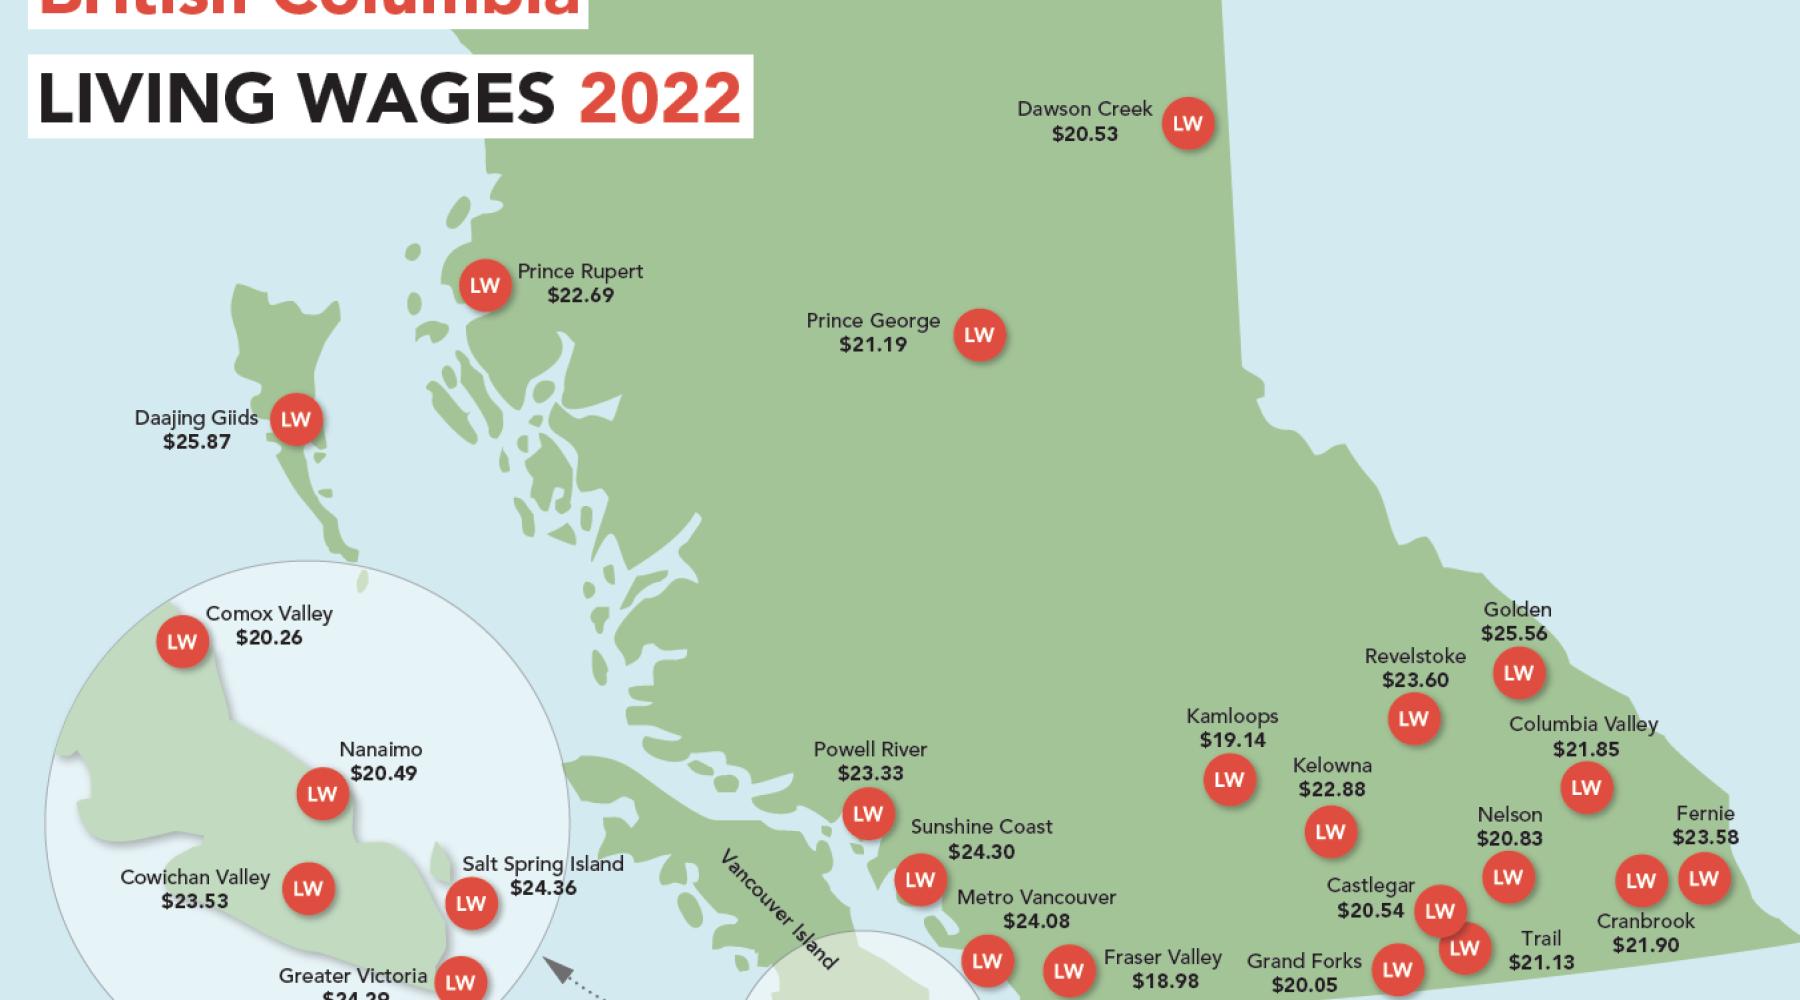 Map of Living Wages across BC